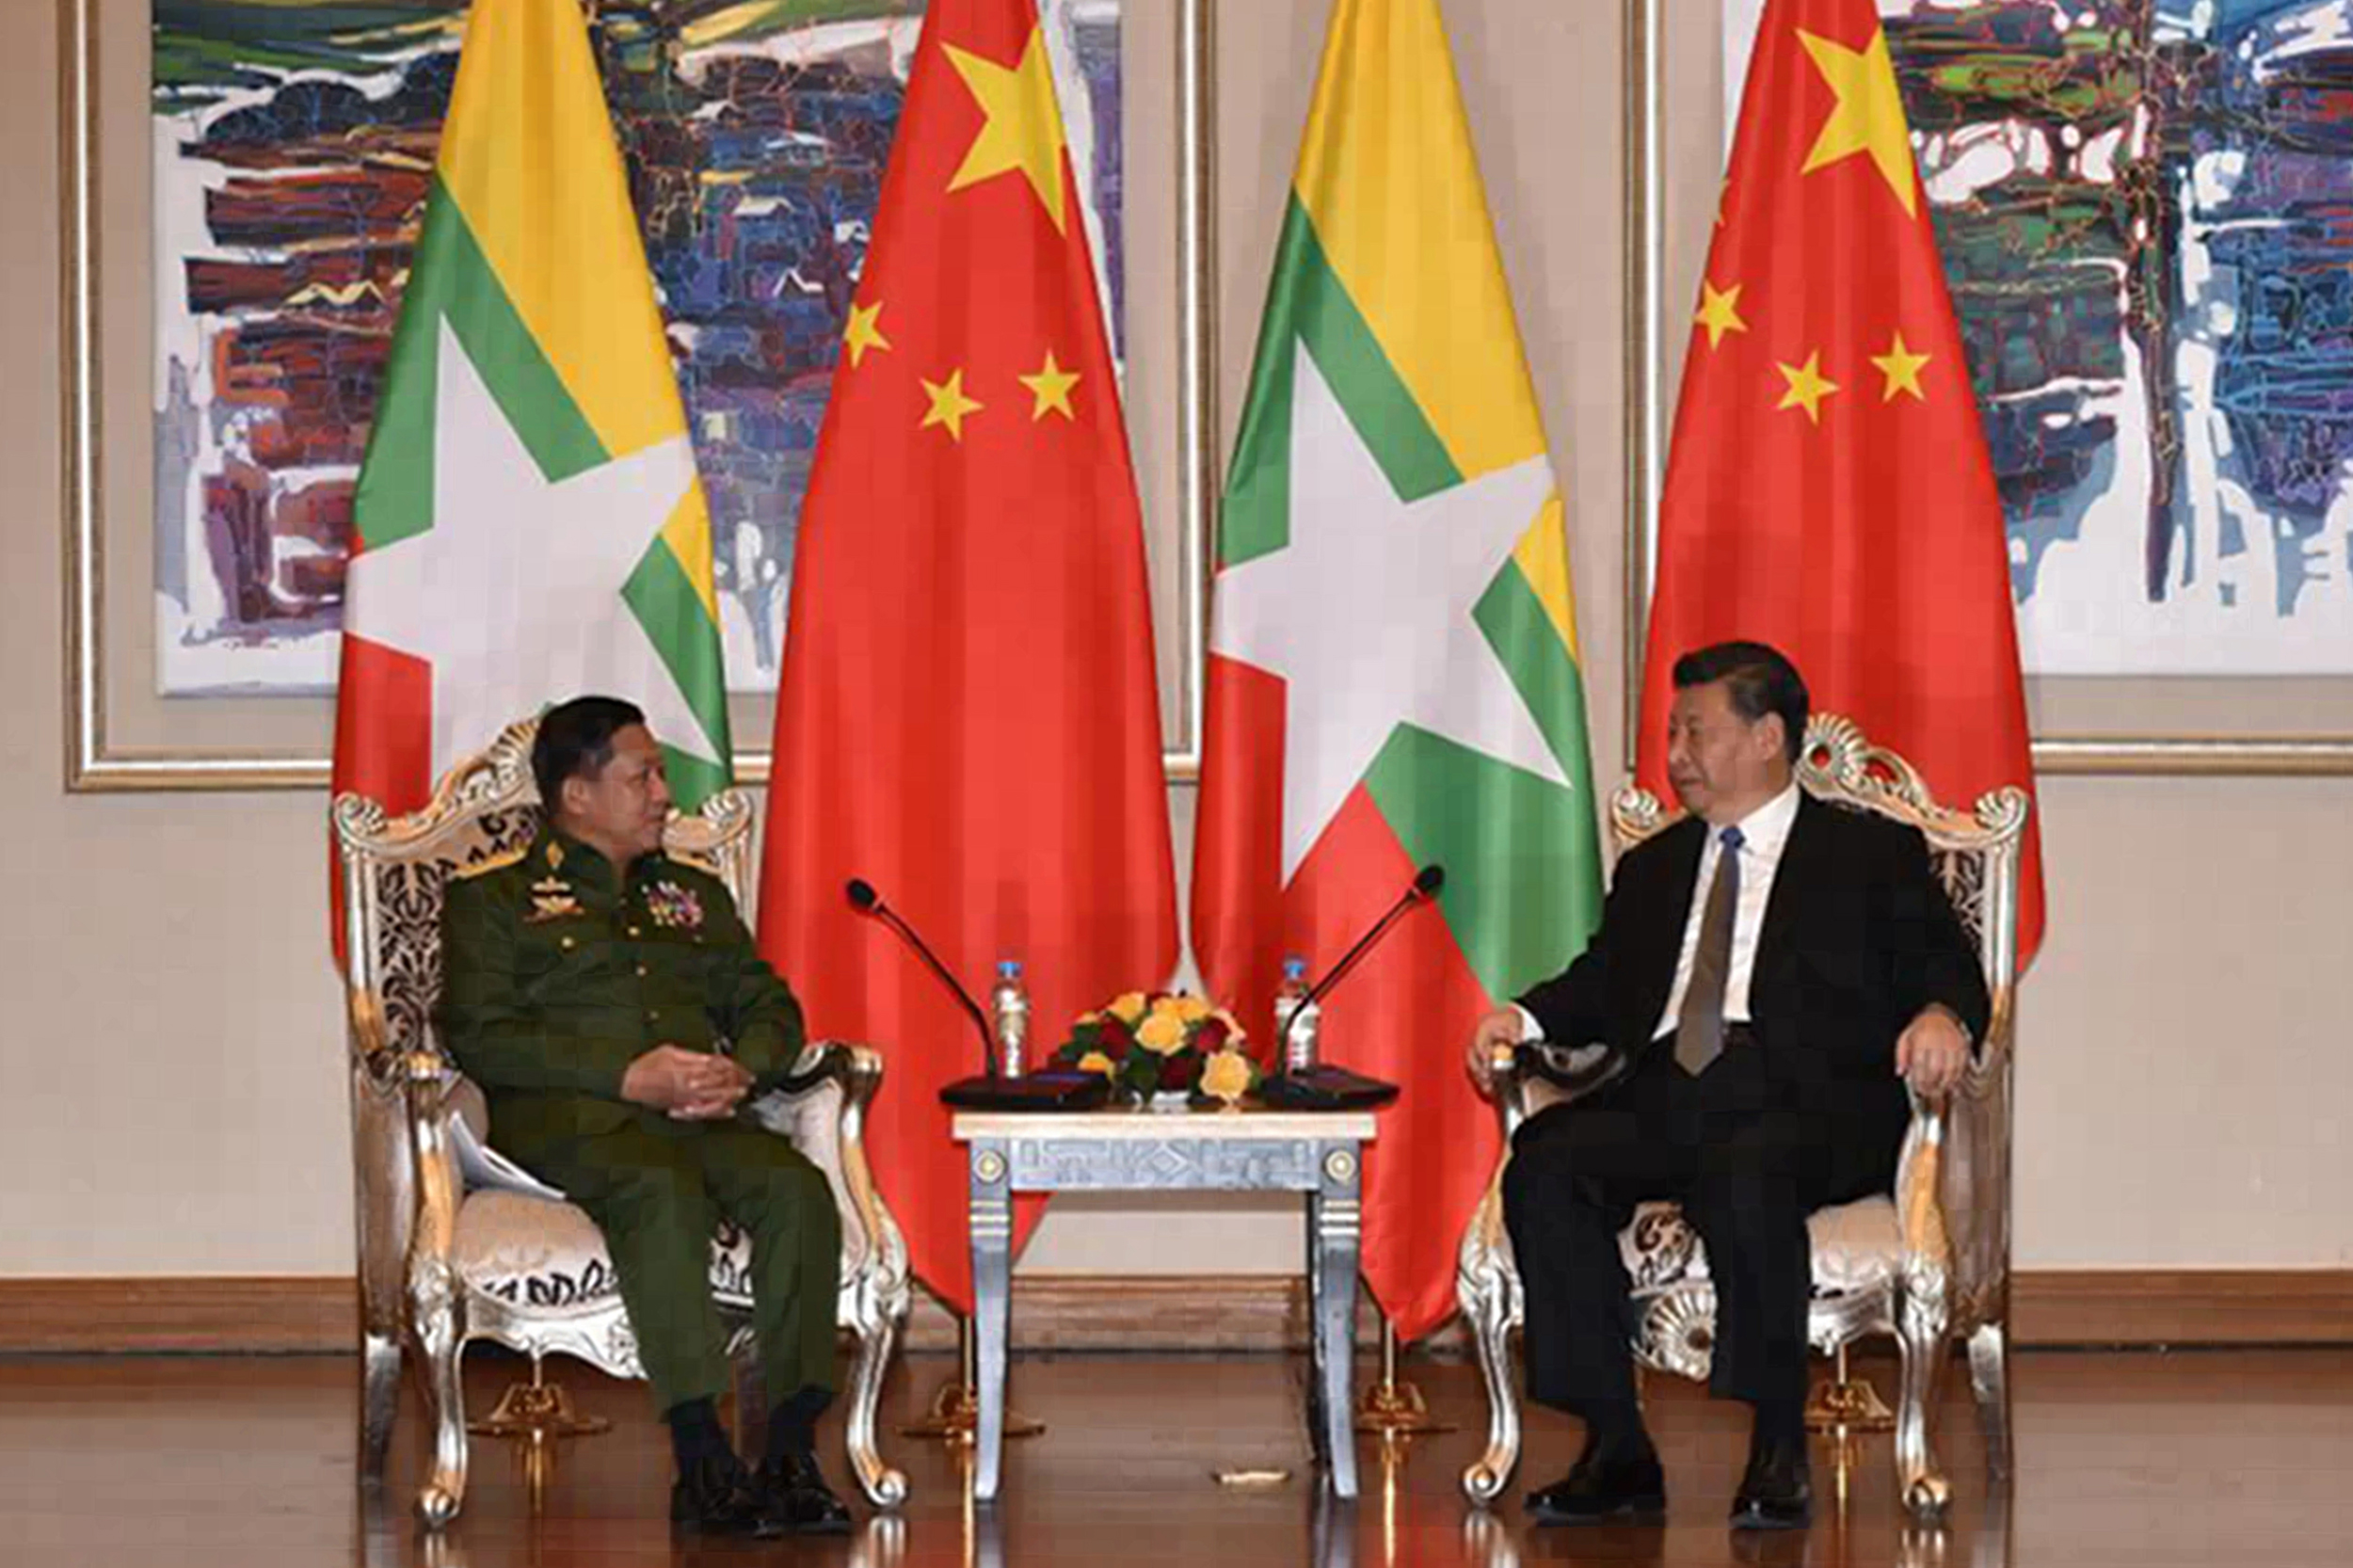 Myanmar's army chief Min Aung Hlaing speaks Xi Jinping during a recent meeting in Naypyidaw. (AFP, HANDOUT)